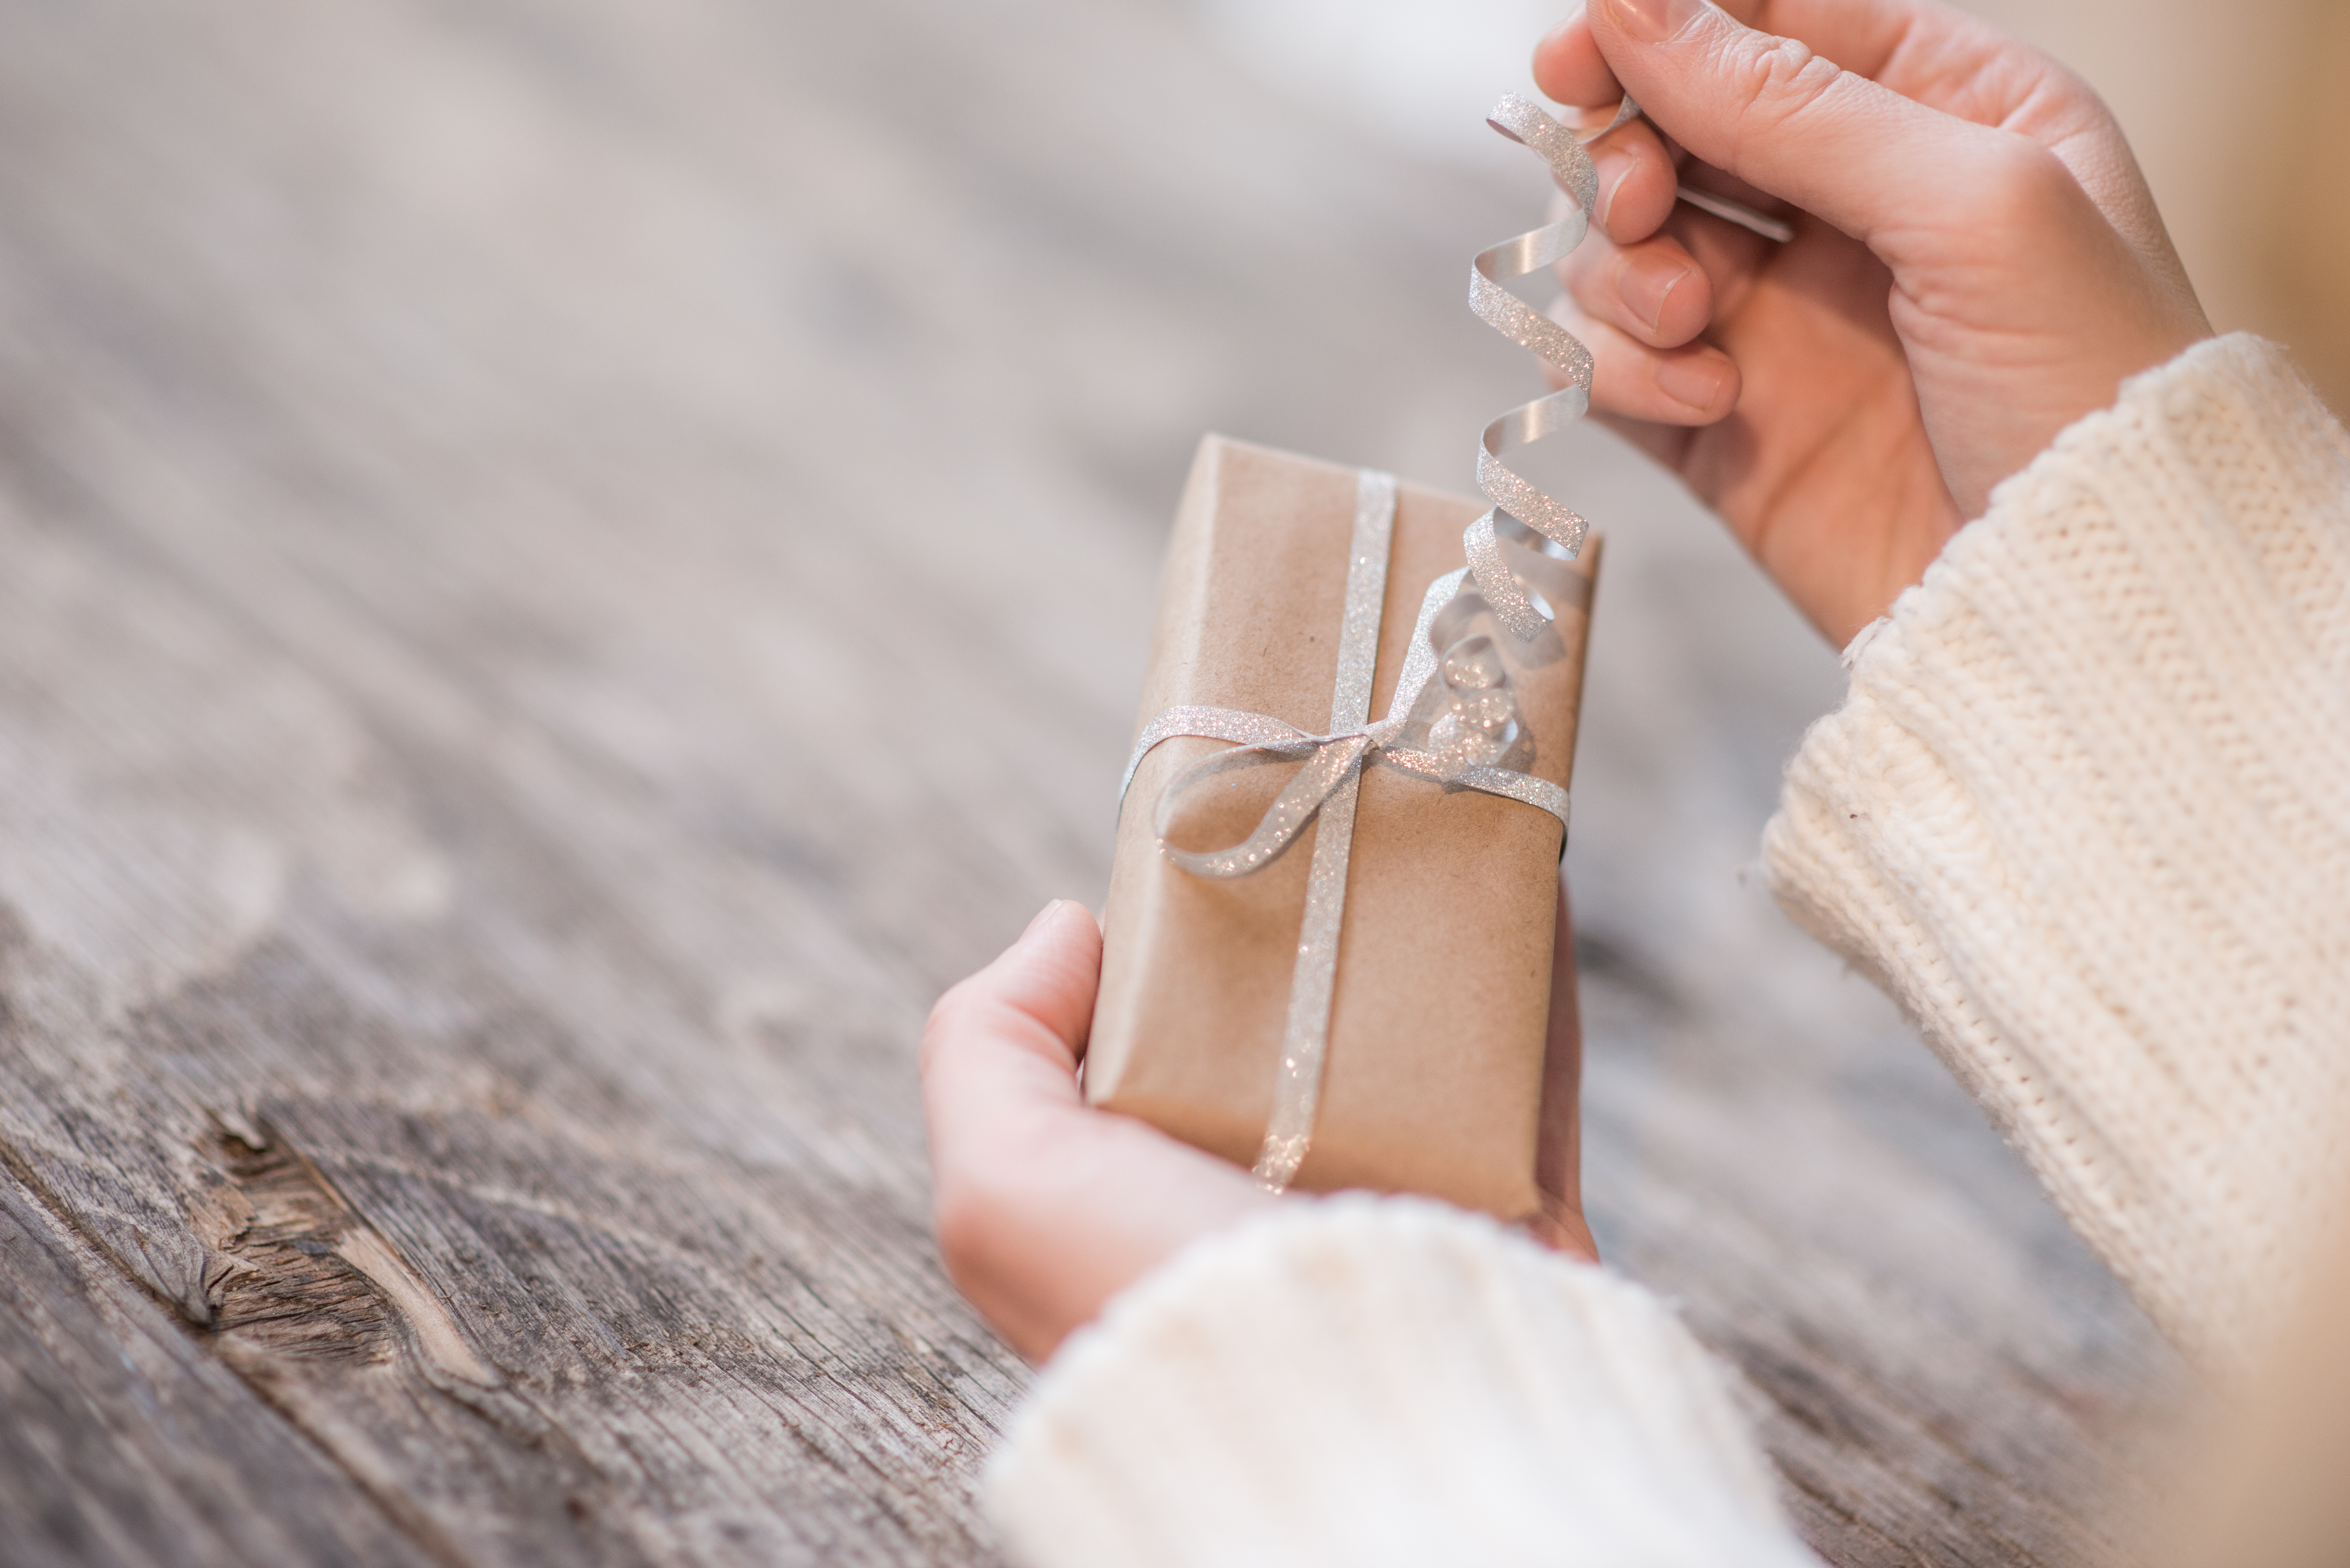 A woman opening a gift | Source: Shutterstock